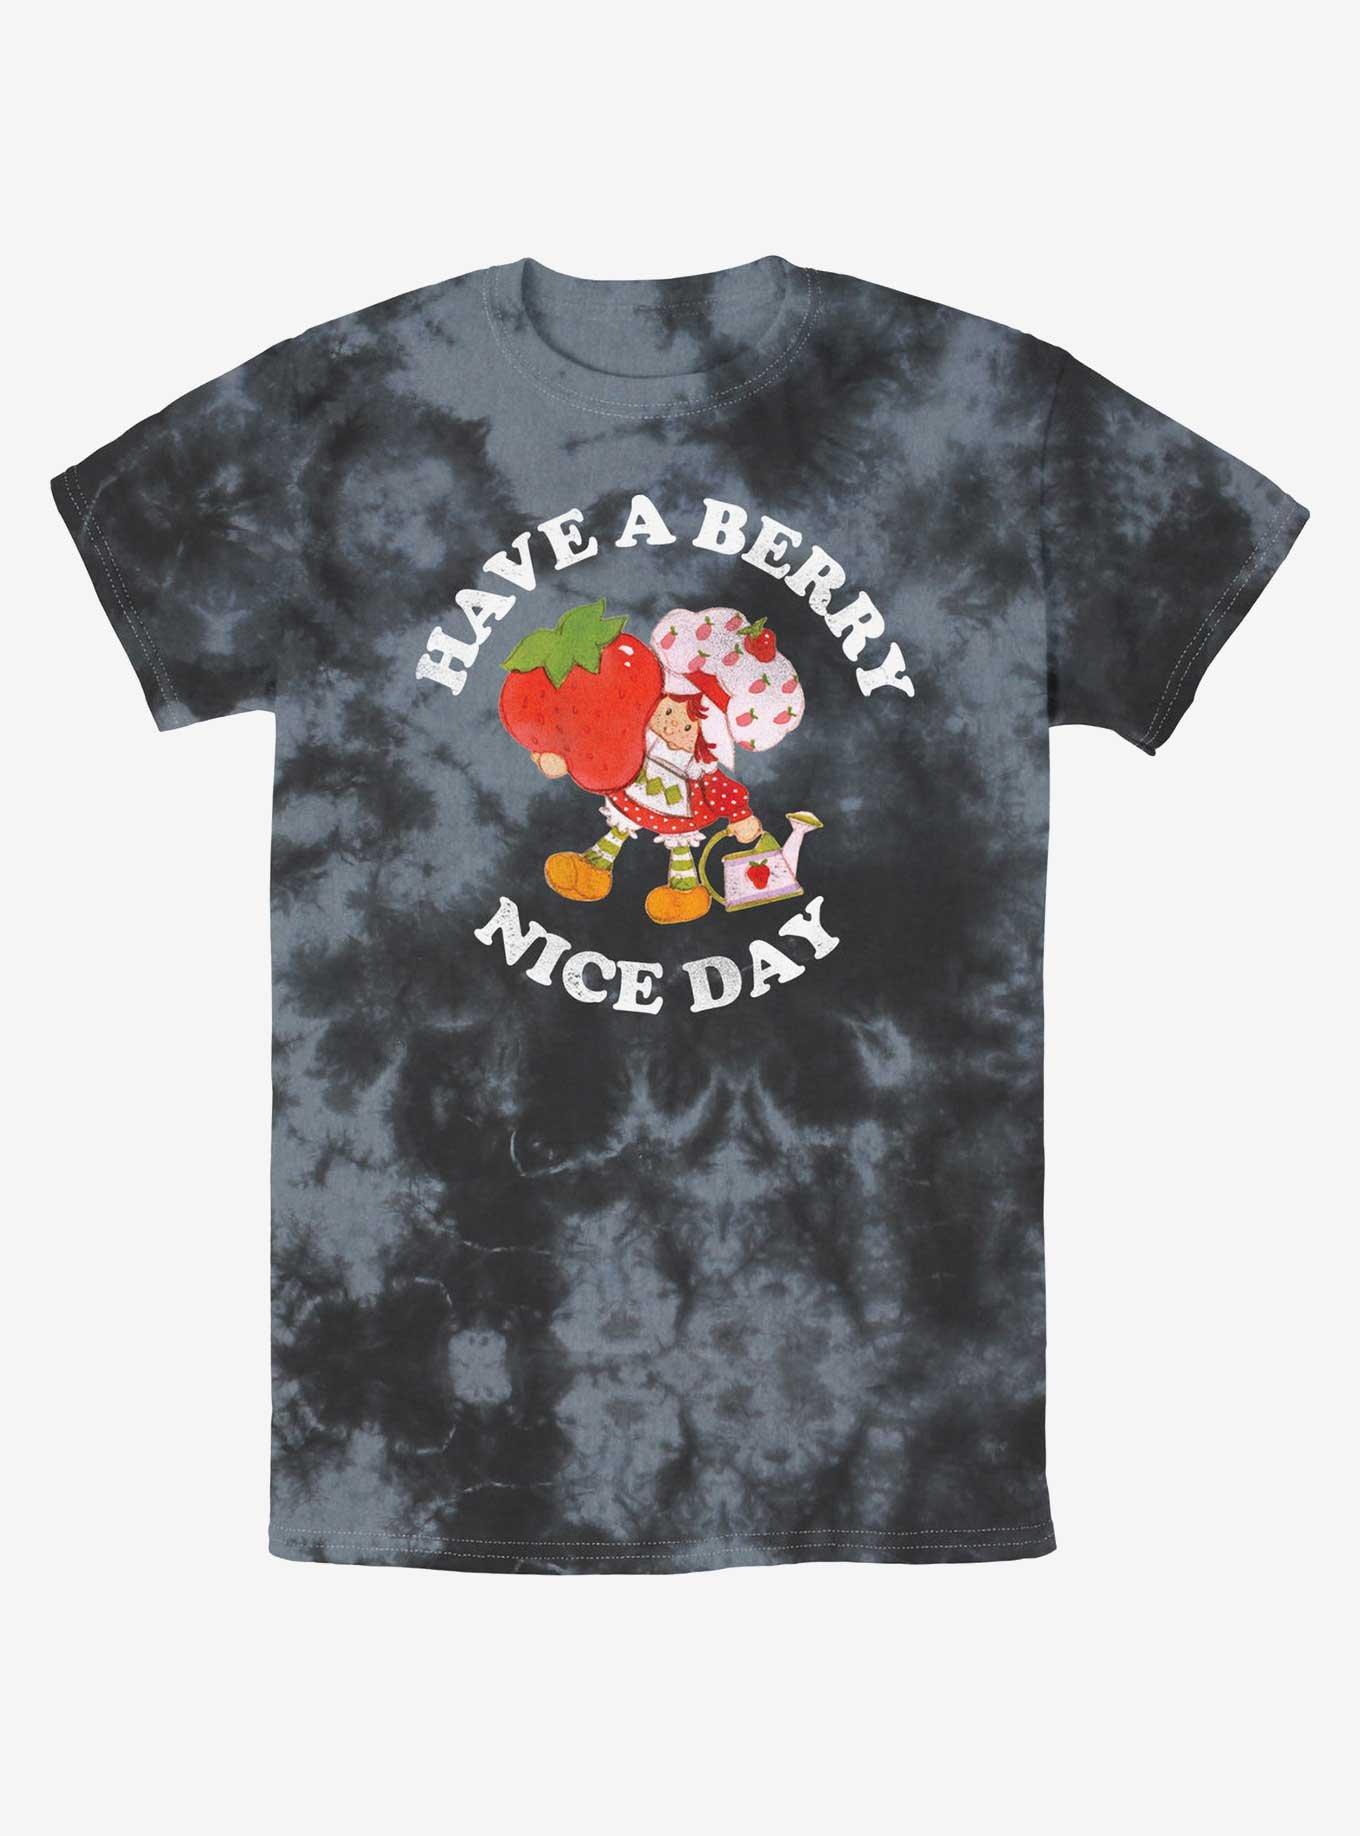 Strawberry Shortcake Have A Berry Nice Day Tie-Dye T-Shirt, , hi-res